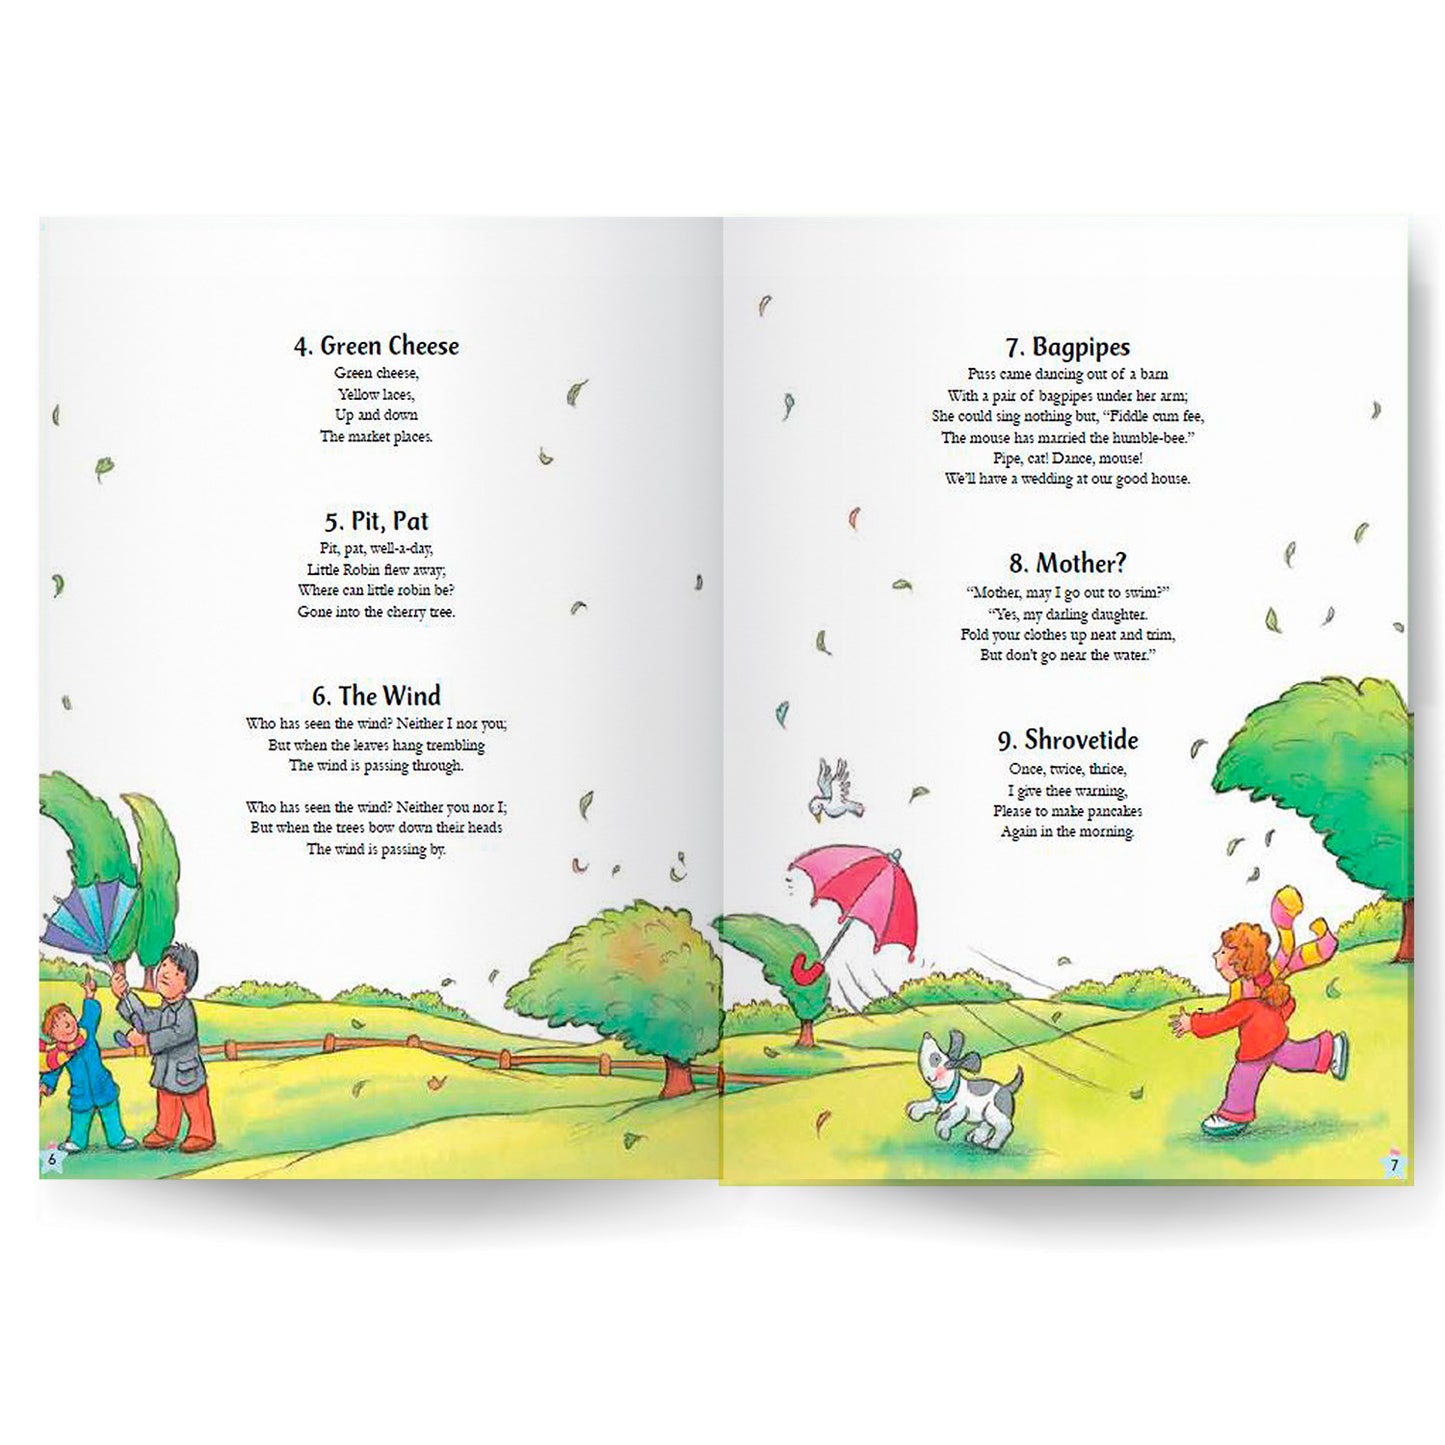 111 Stories & Rhymes for Boys | Storybook for boys | Rhymes for boys | Children's storybook | Story Collection Parragon